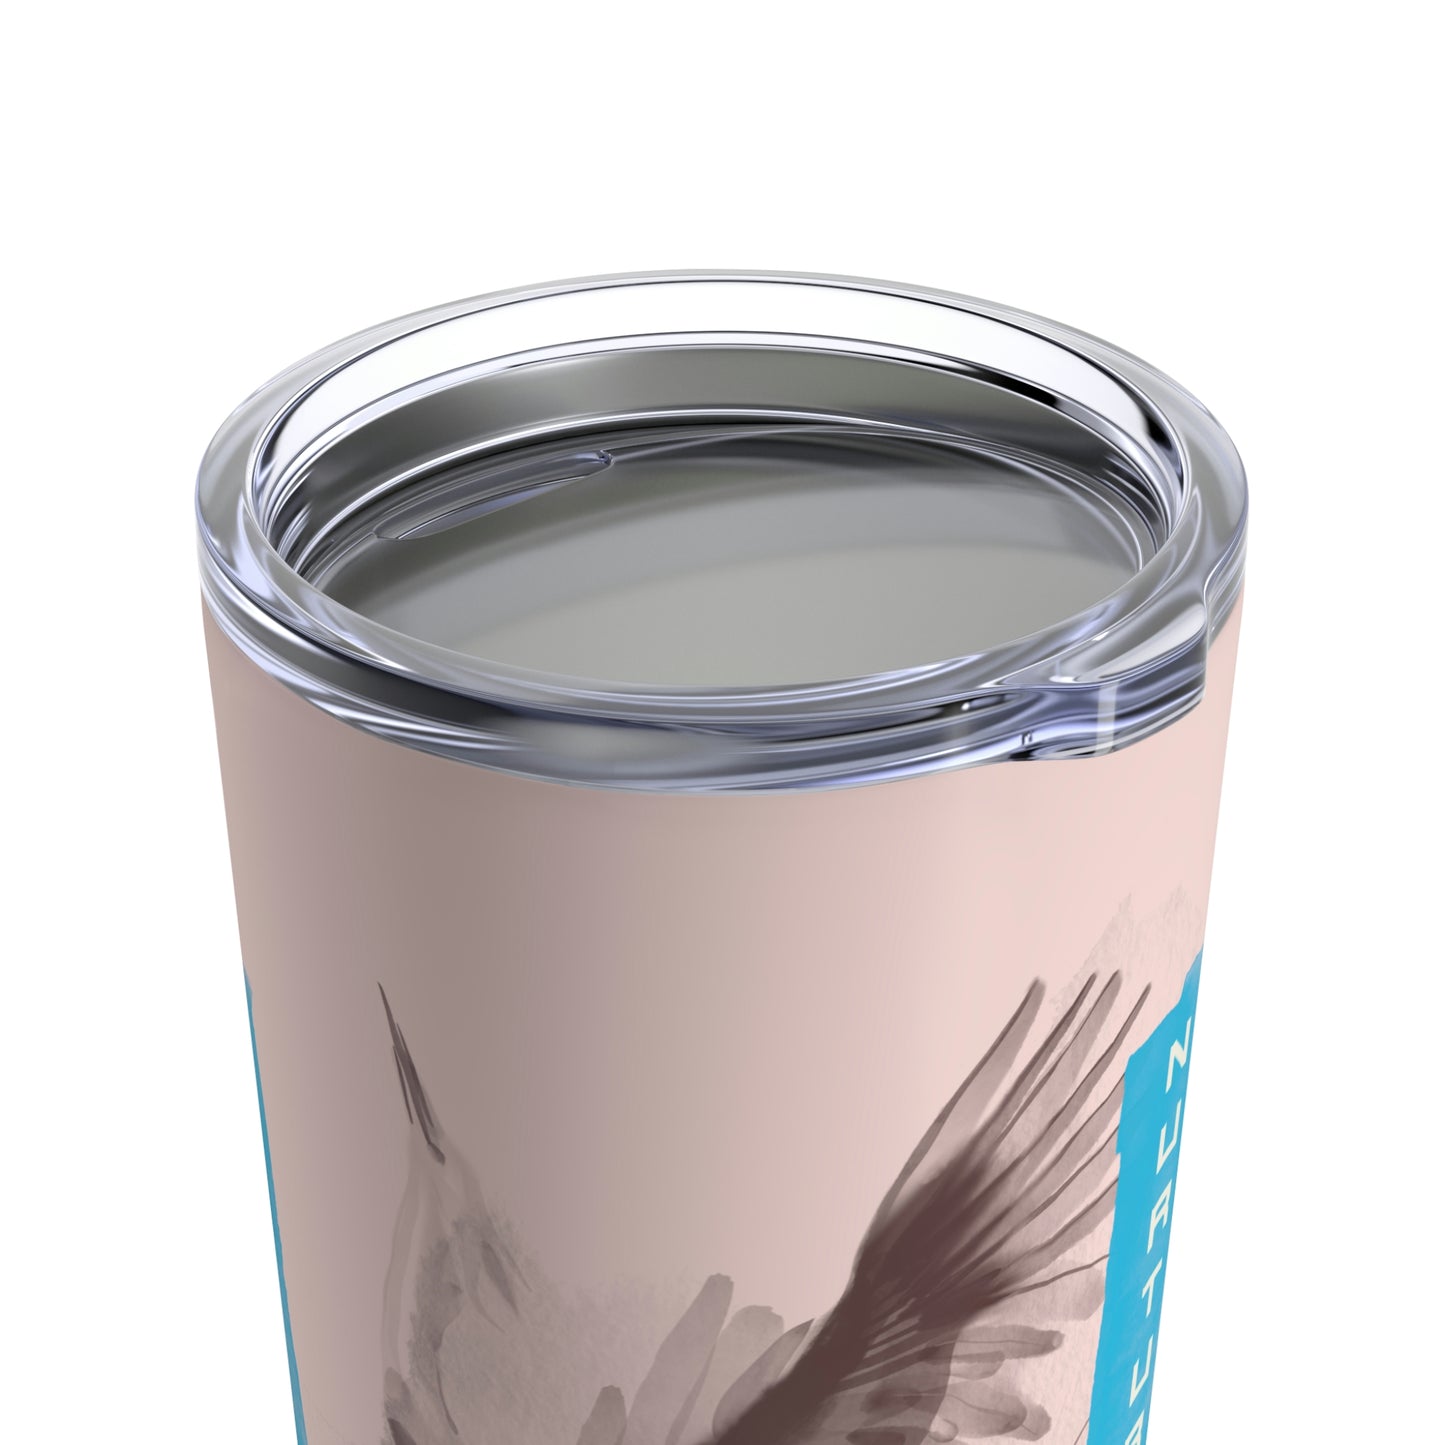 Women's Family Proclamation "Nurture" Inspired Insulated Steel Tumbler 20oz